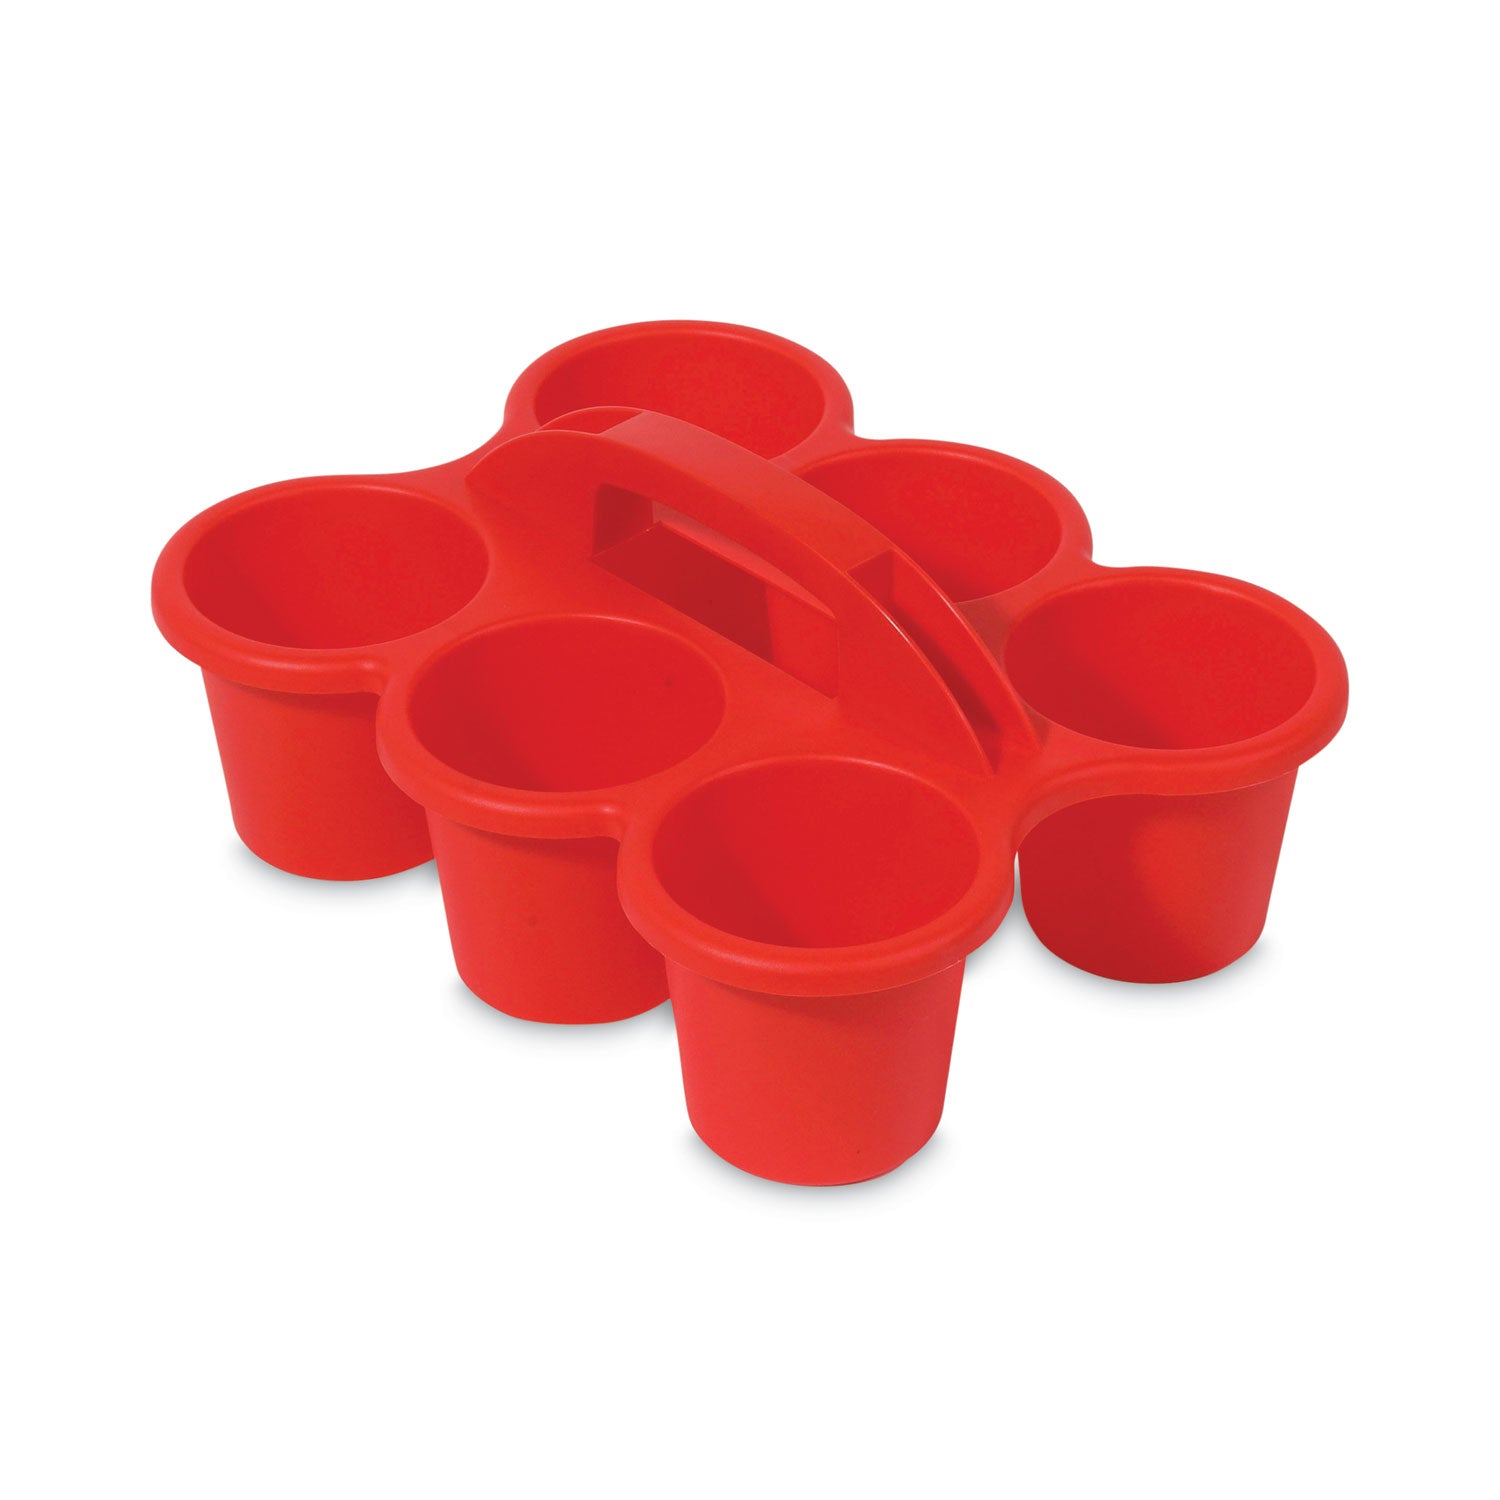 little-artist-antimicrobial-six-cup-caddy-red_def39509red - 2